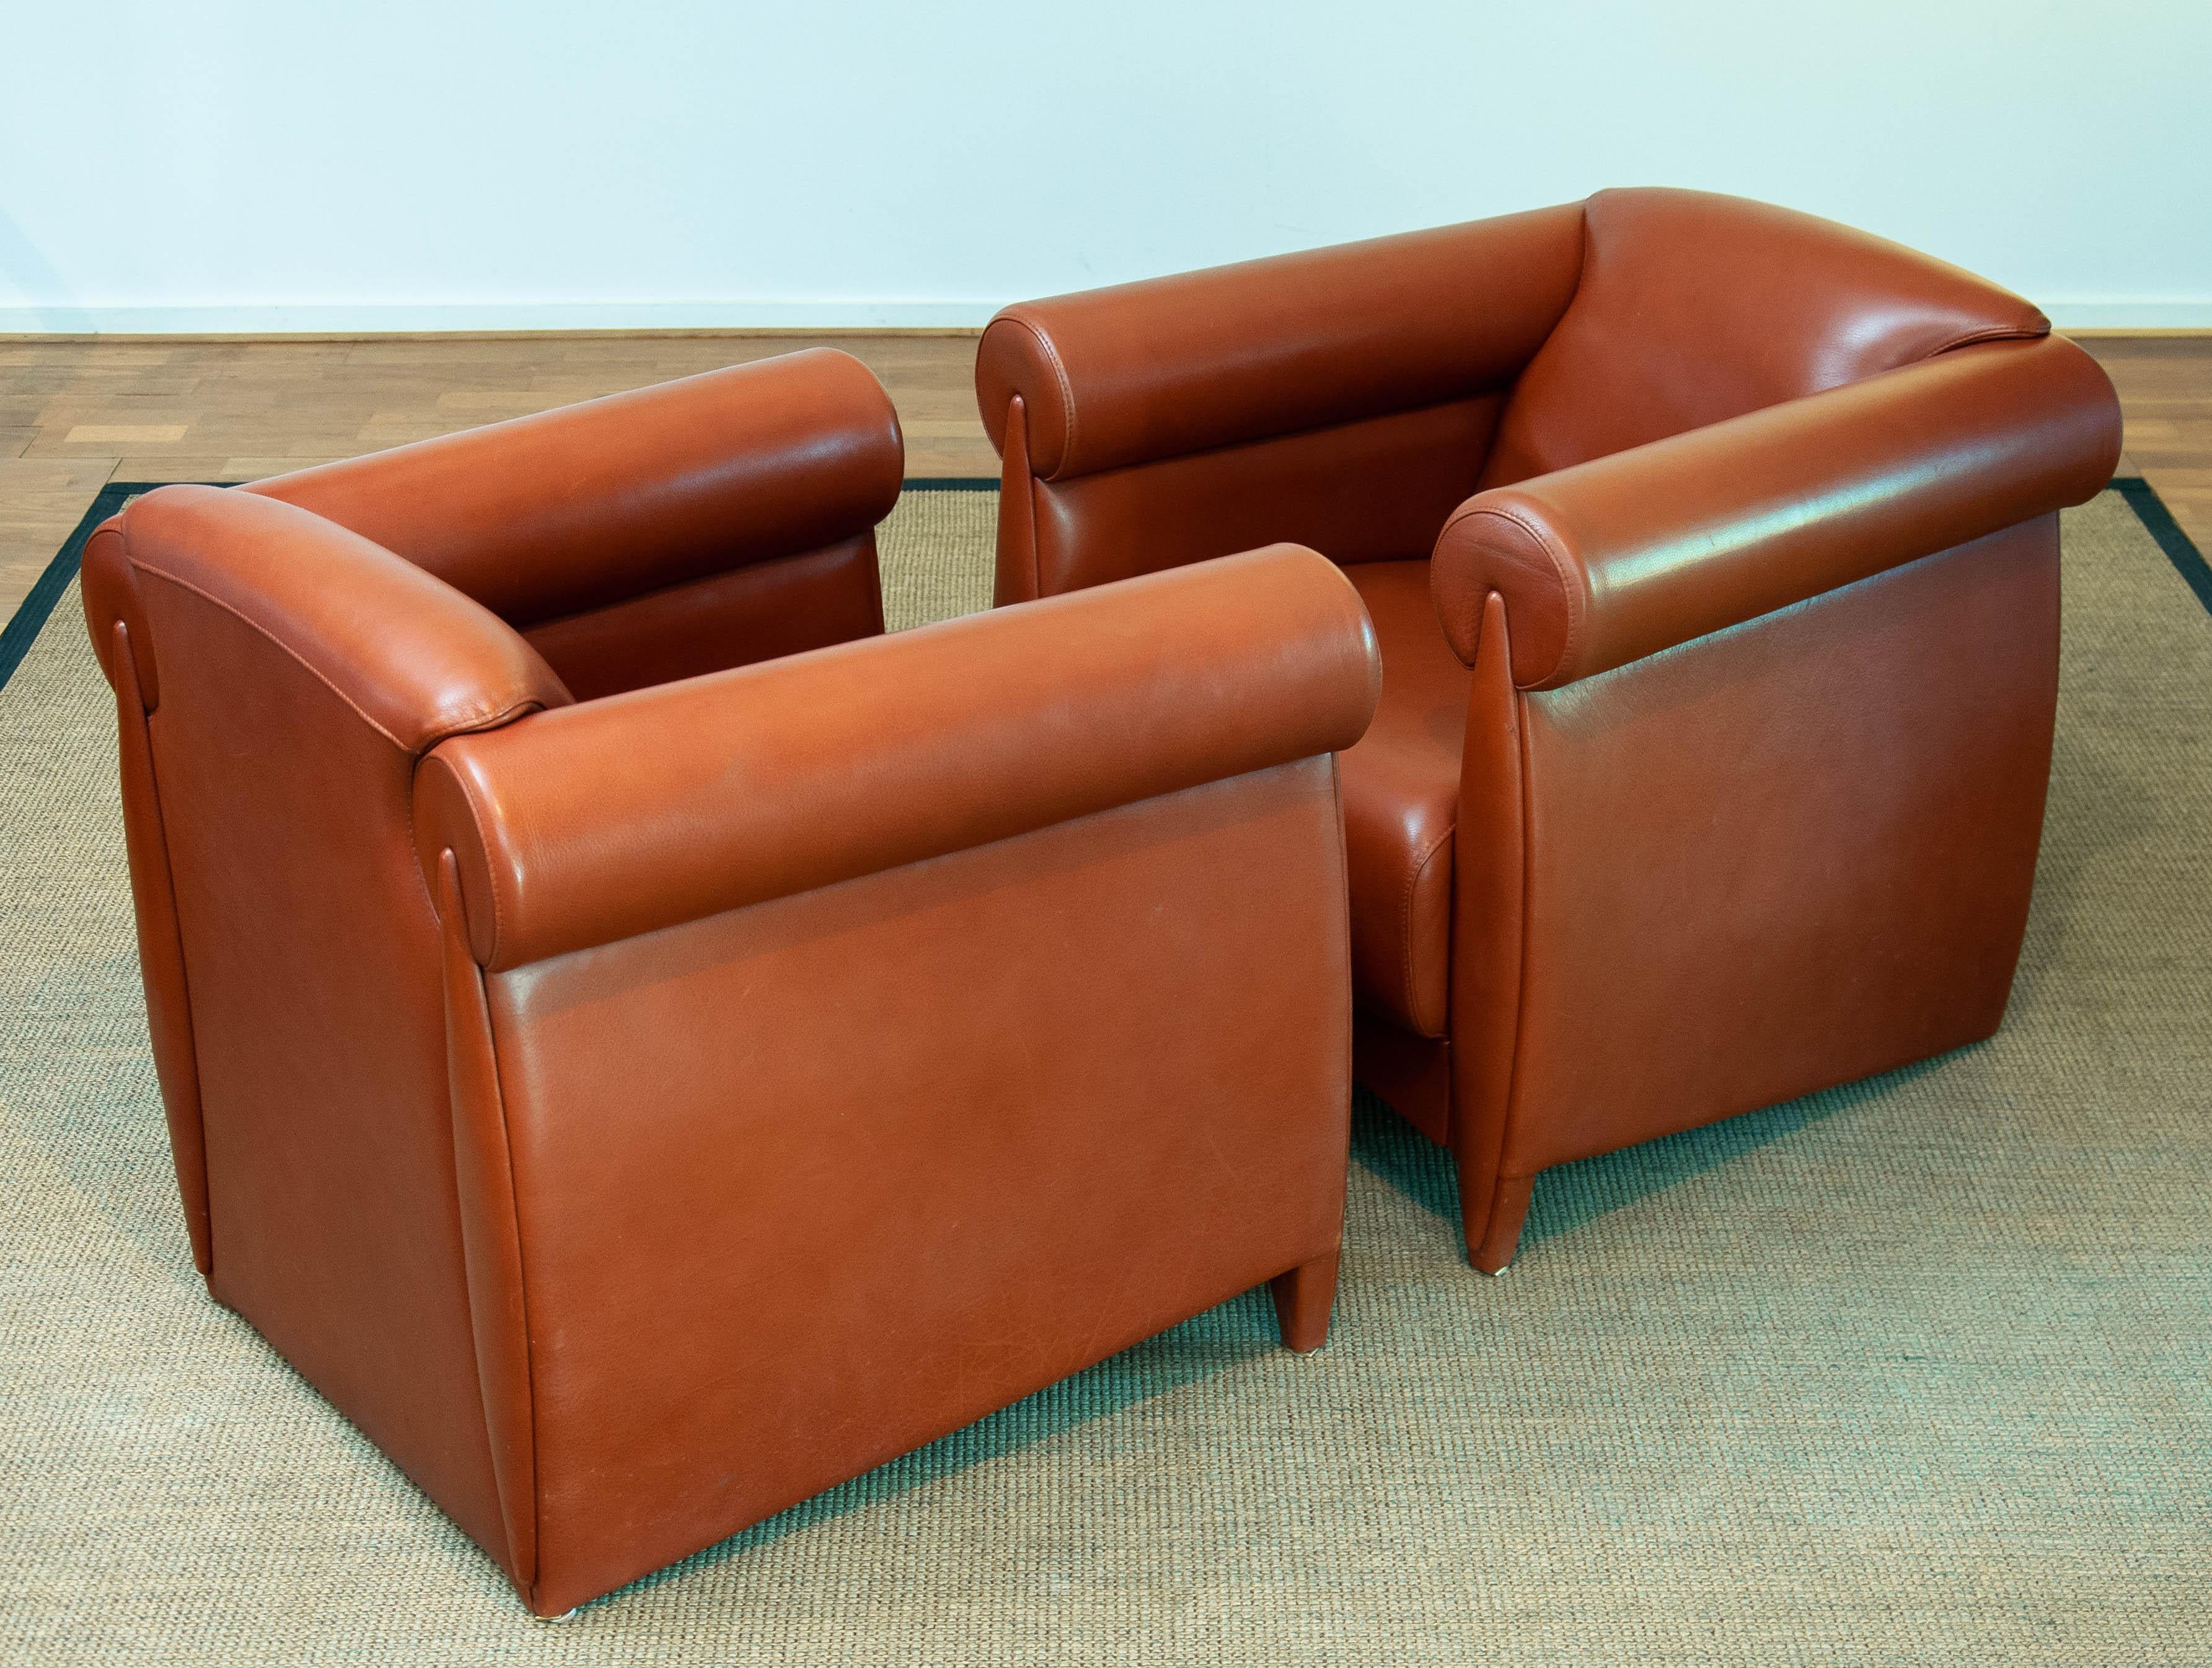 Late 20th Century 1980s Modern Pair Lounge / Club Chairs In Cognac Leather By Klaus Wettergren For Sale